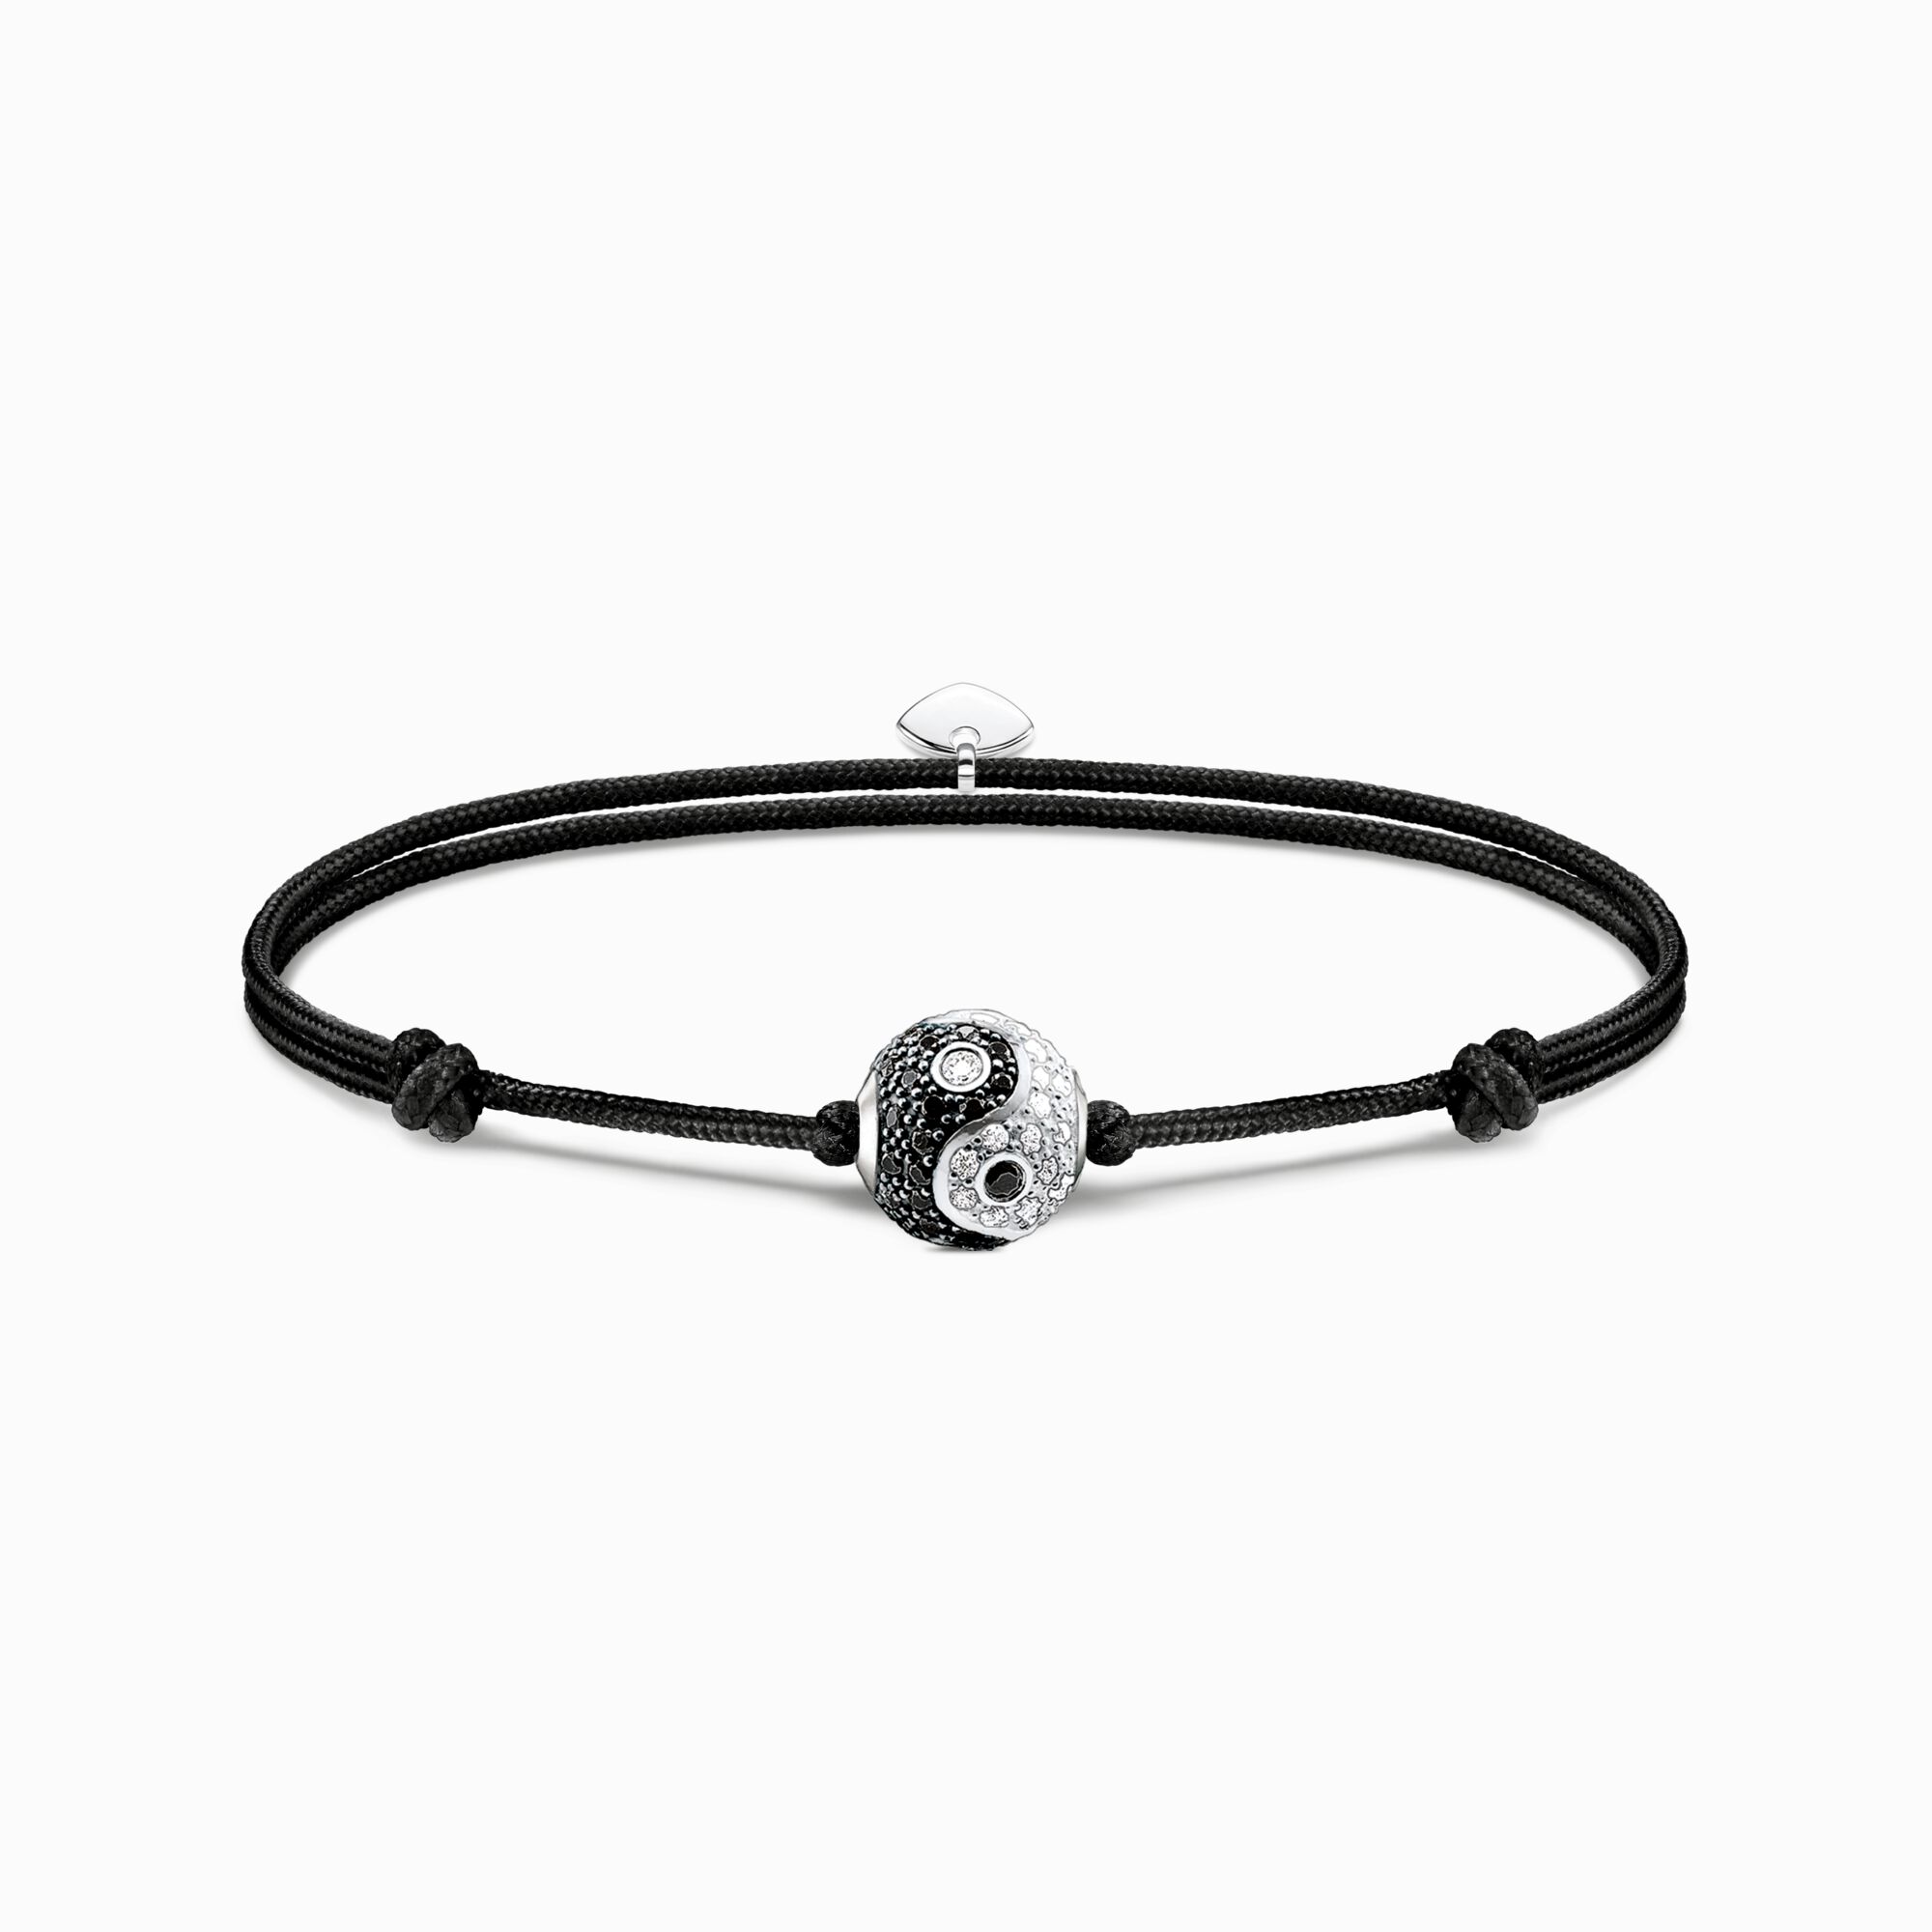 Bracelet Karma Secret with Yin-Yang Bead from the Karma Beads collection in the THOMAS SABO online store